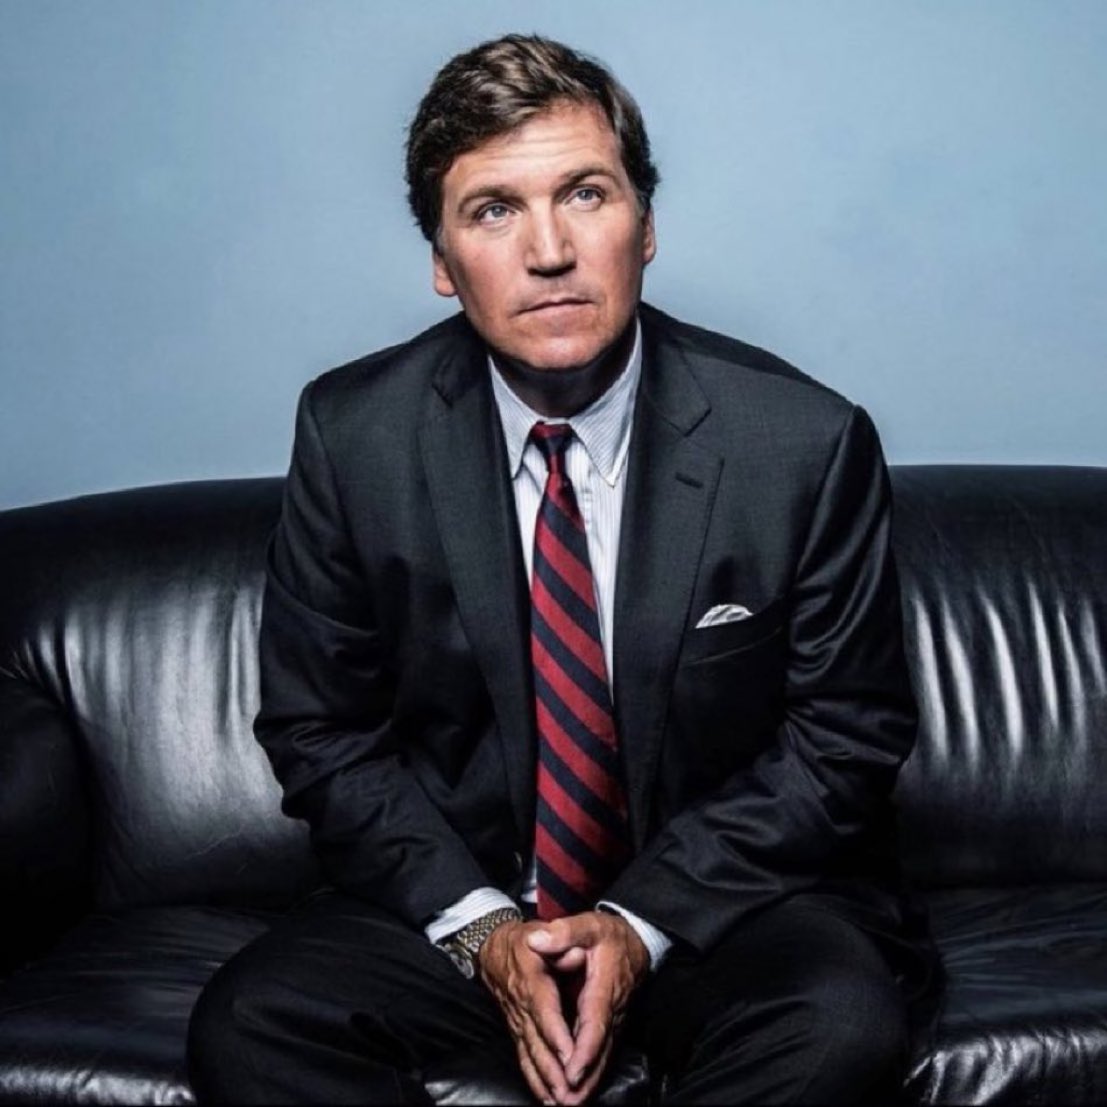 Do you trust Tucker Carlson more than the Media?